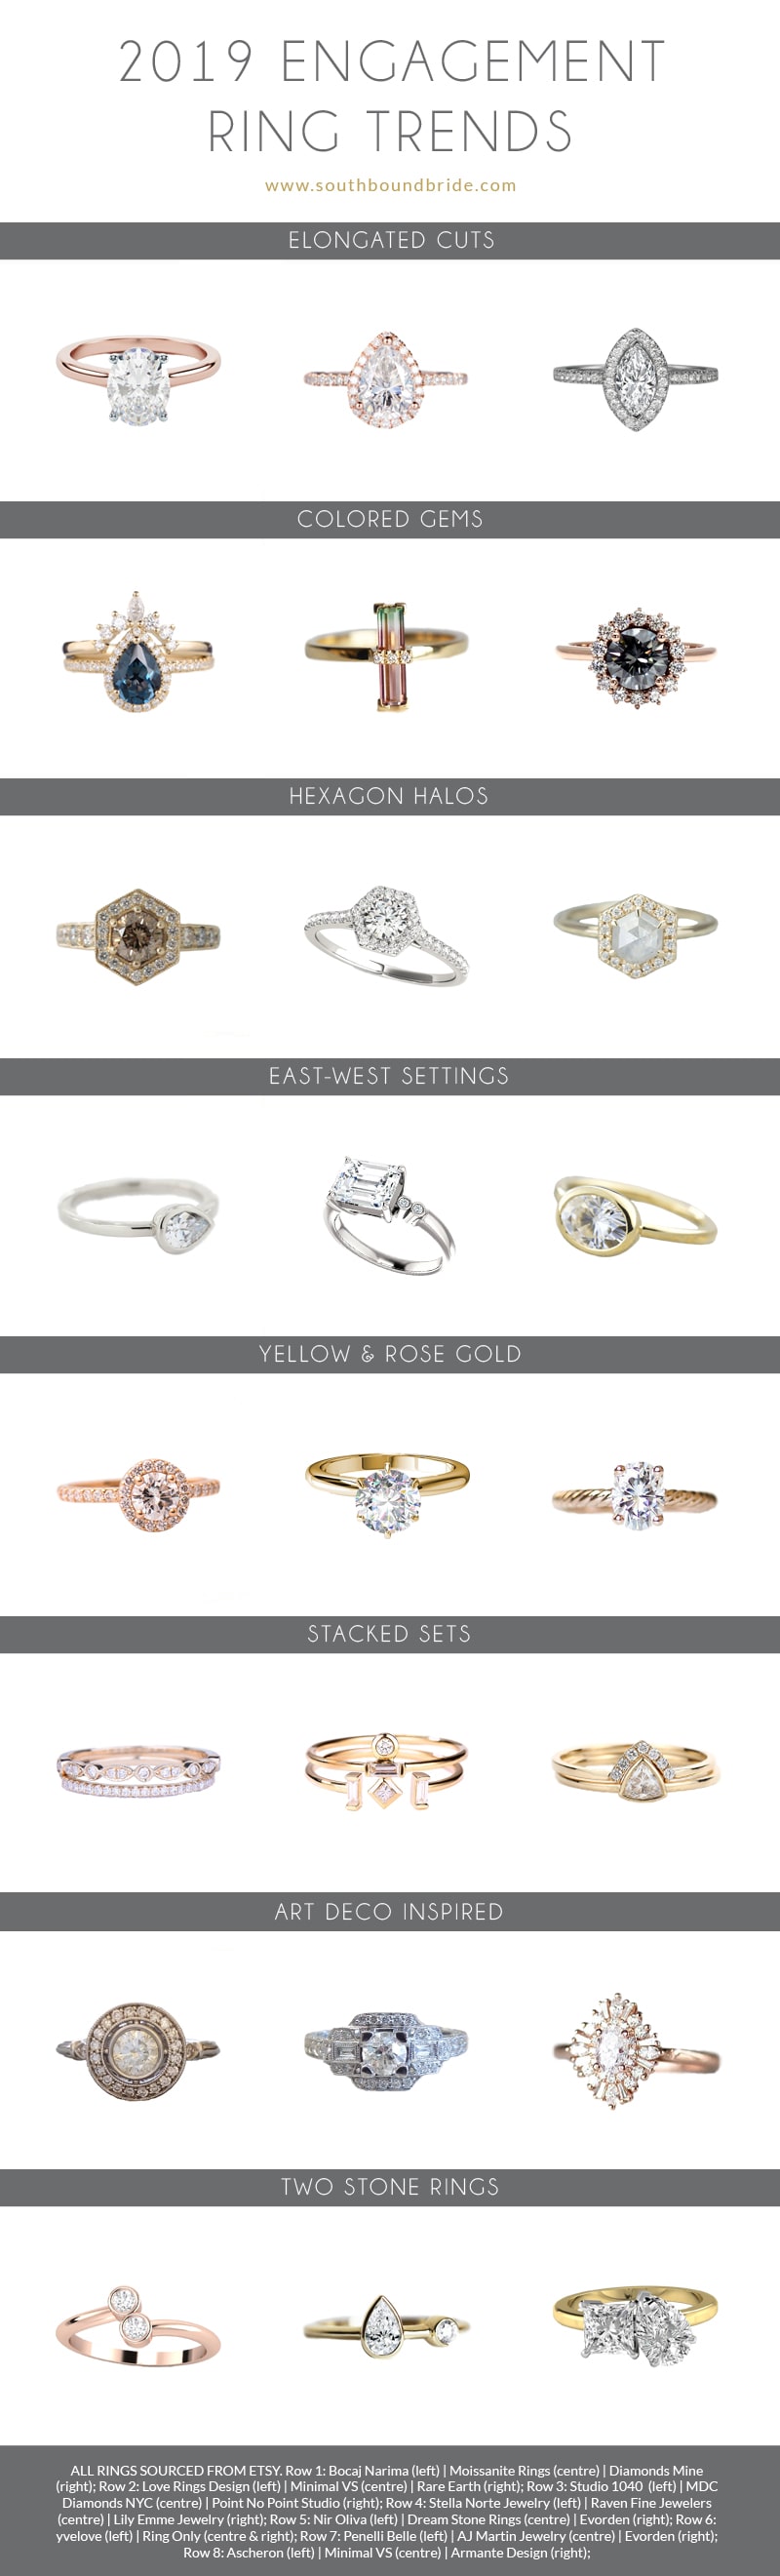 2019 Engagement Ring Trends | SouthBound Bride